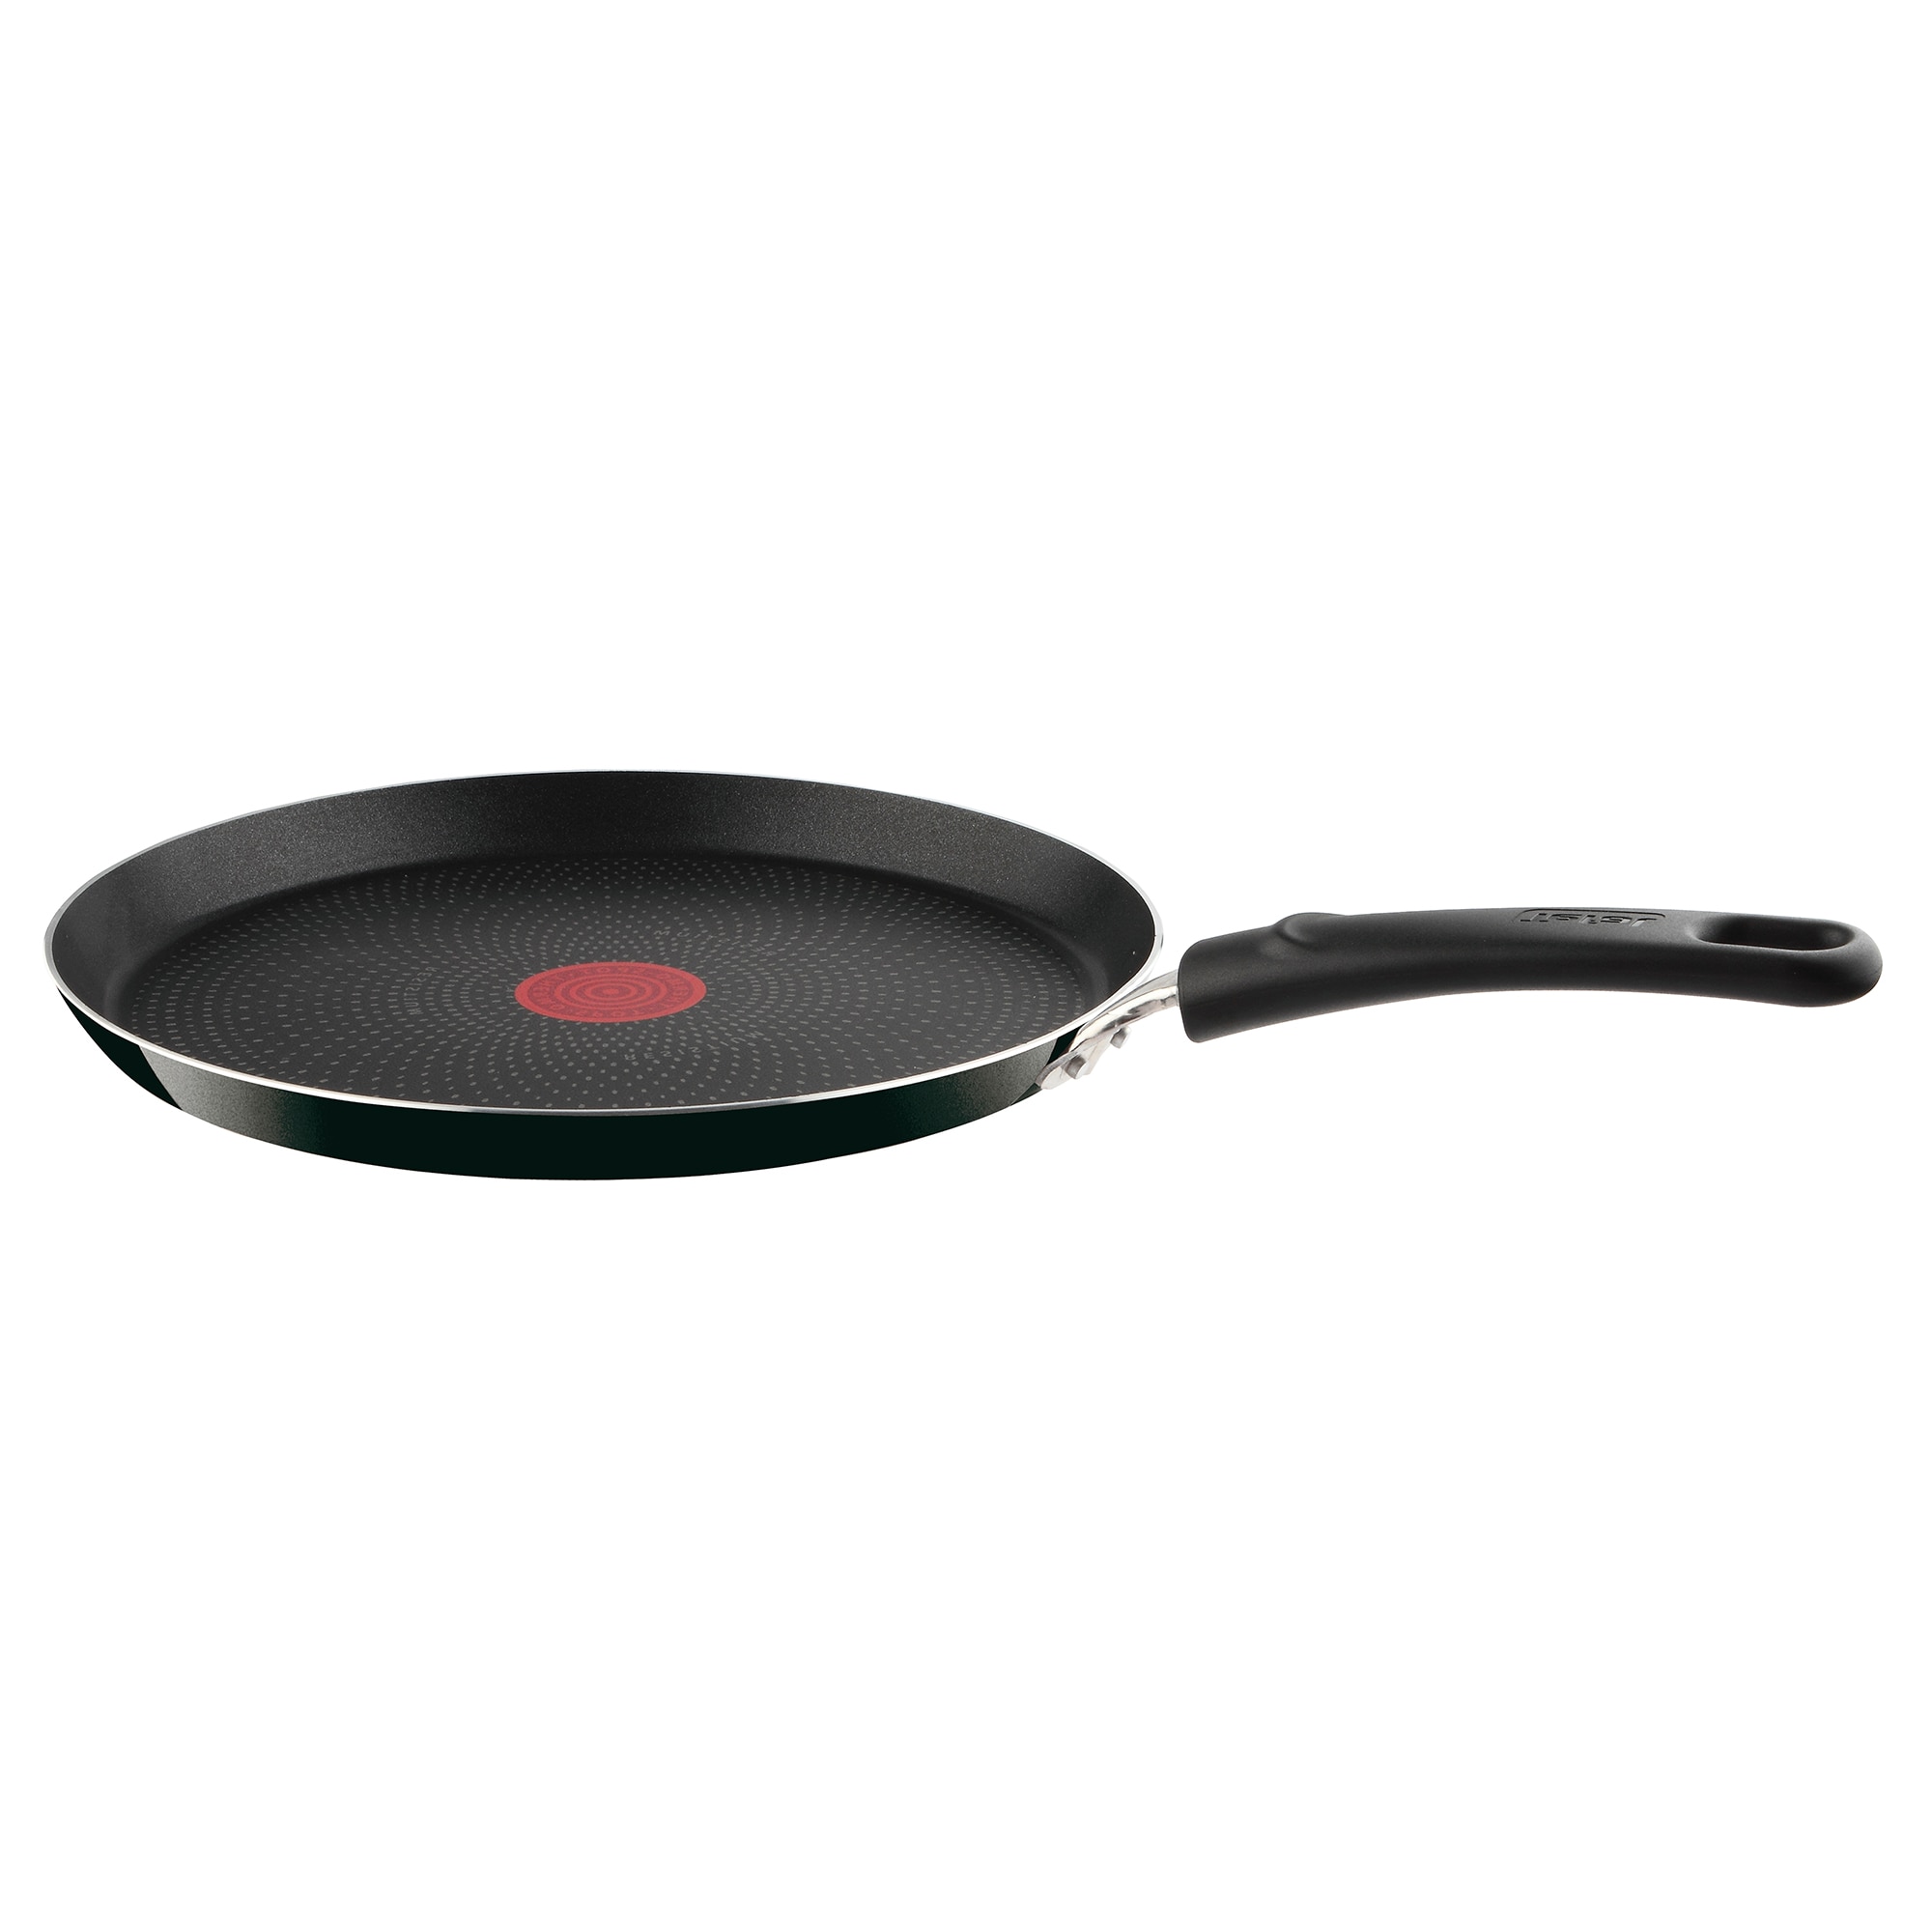 dominate Expertise Chairman Tigaie clatite/omleta Tefal City Cook A3791022, 25 cm - eMAG.ro